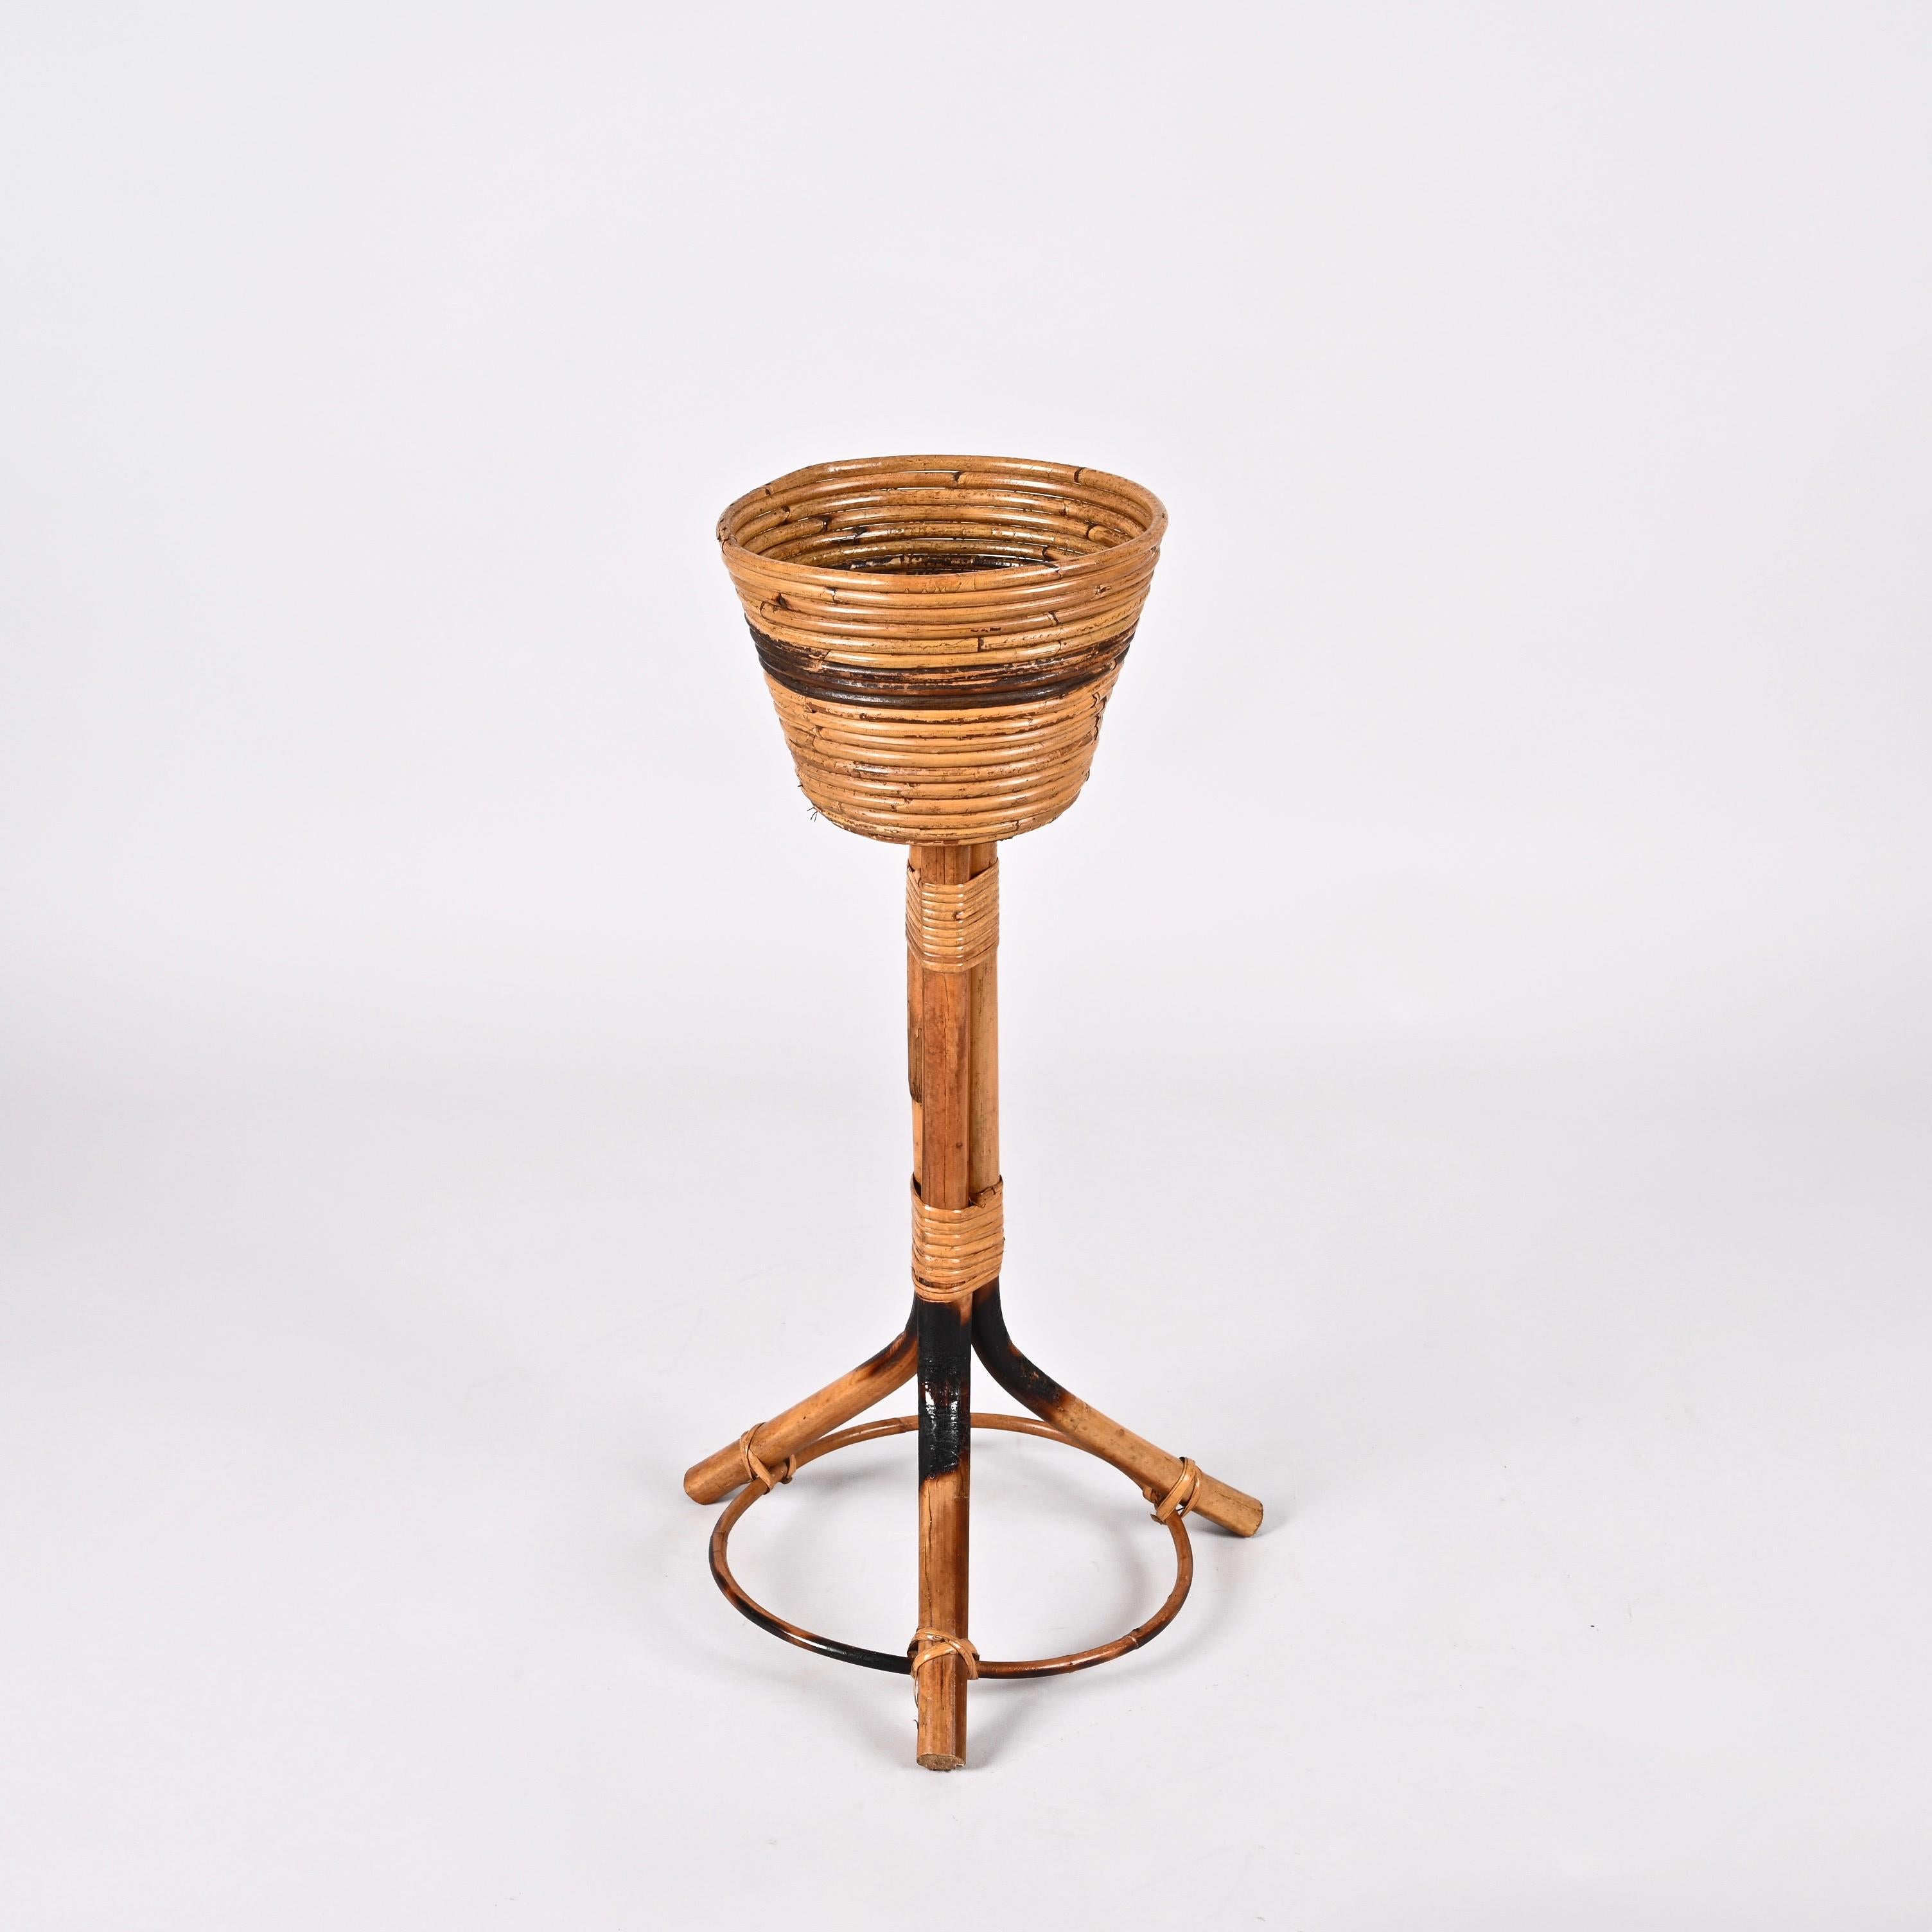 20th Century Midcentury Italian Bamboo Cane and Rattan Round Plant Holder, 1950s For Sale